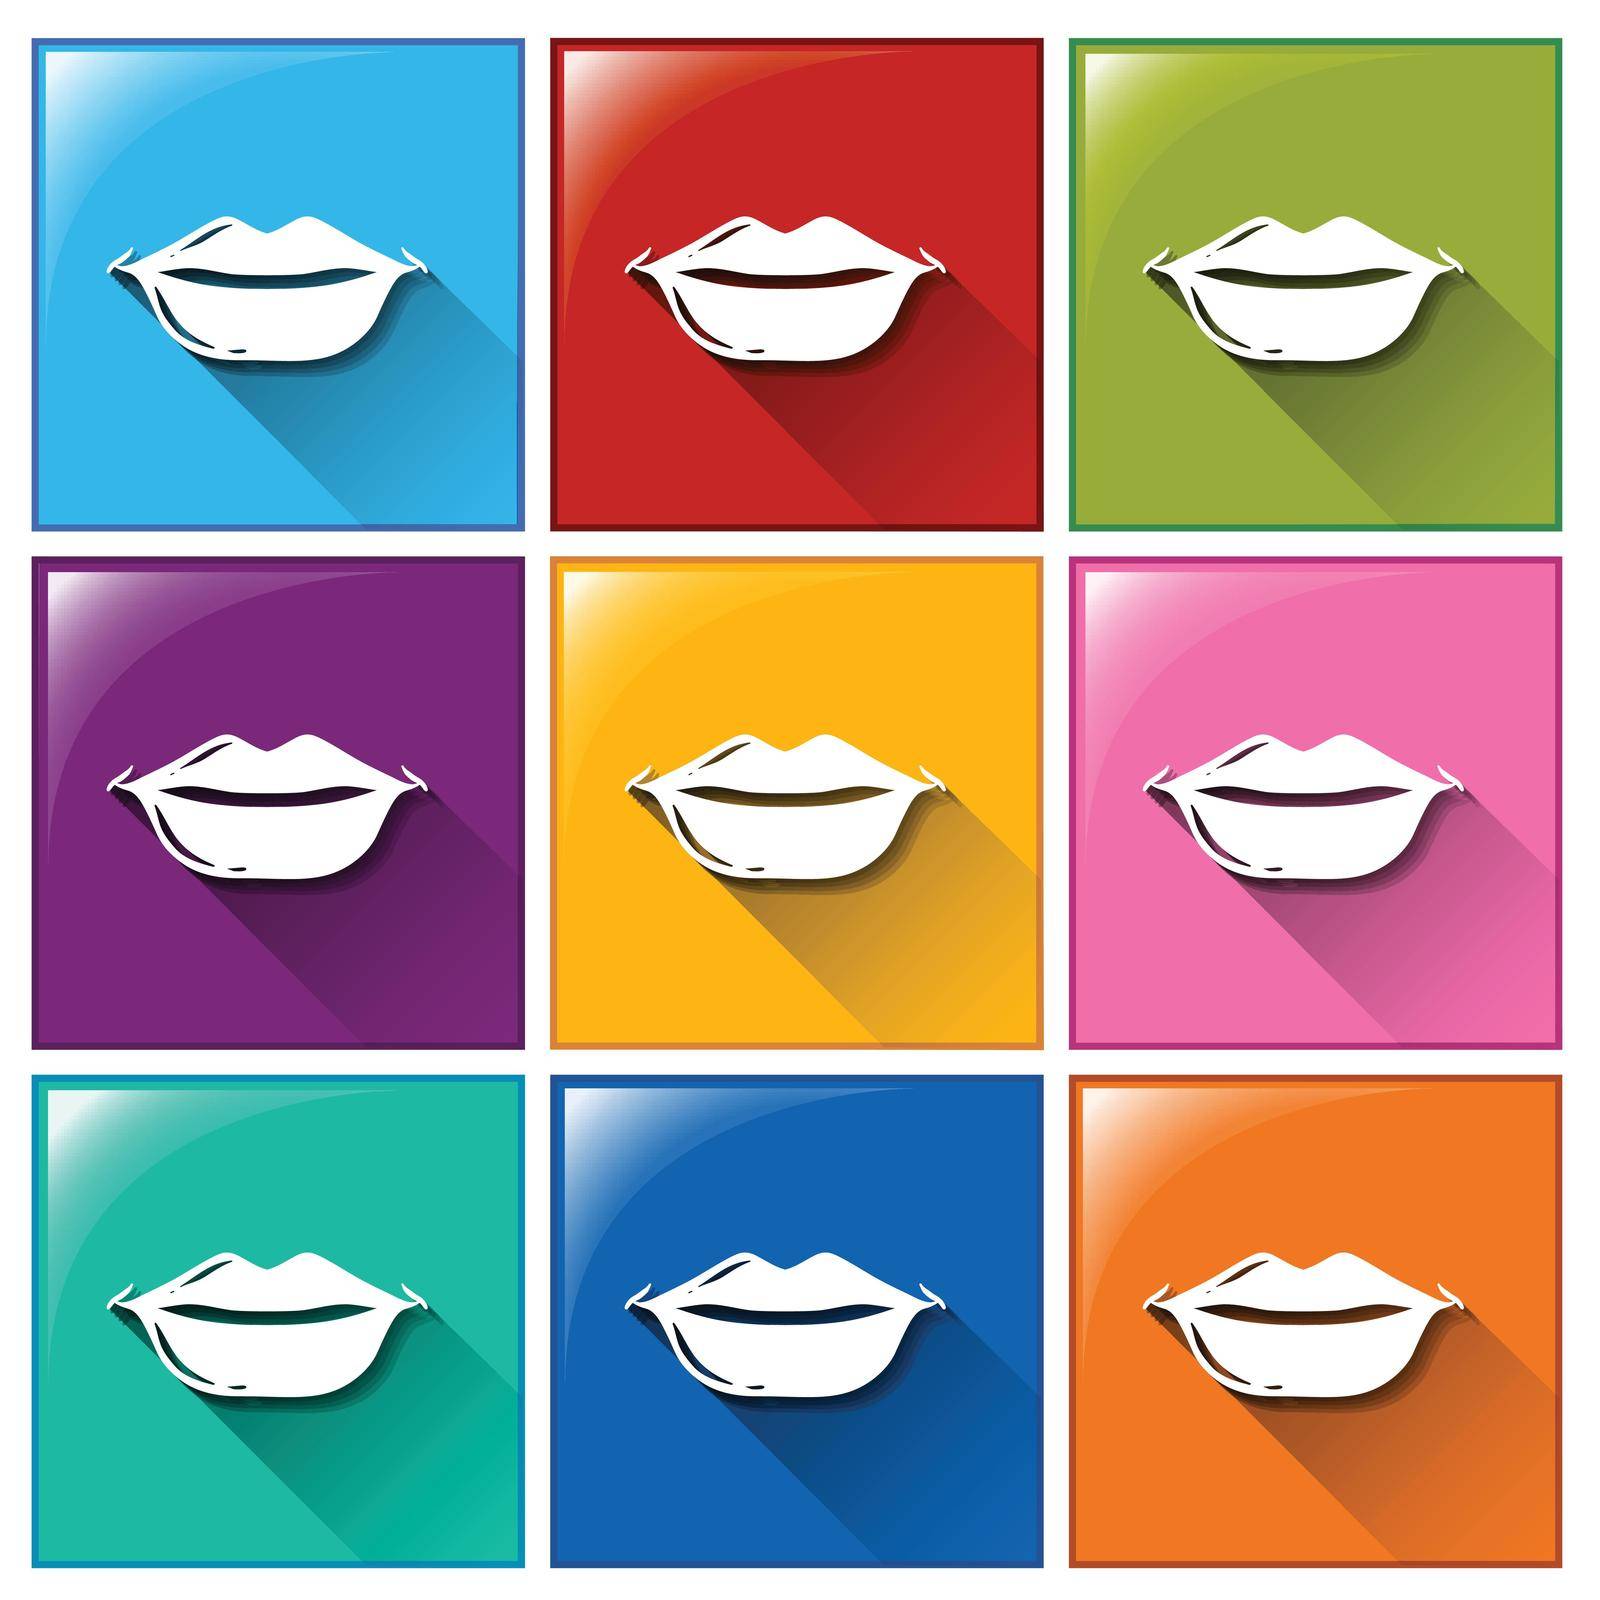 Illustration of the icons with lips on a white background